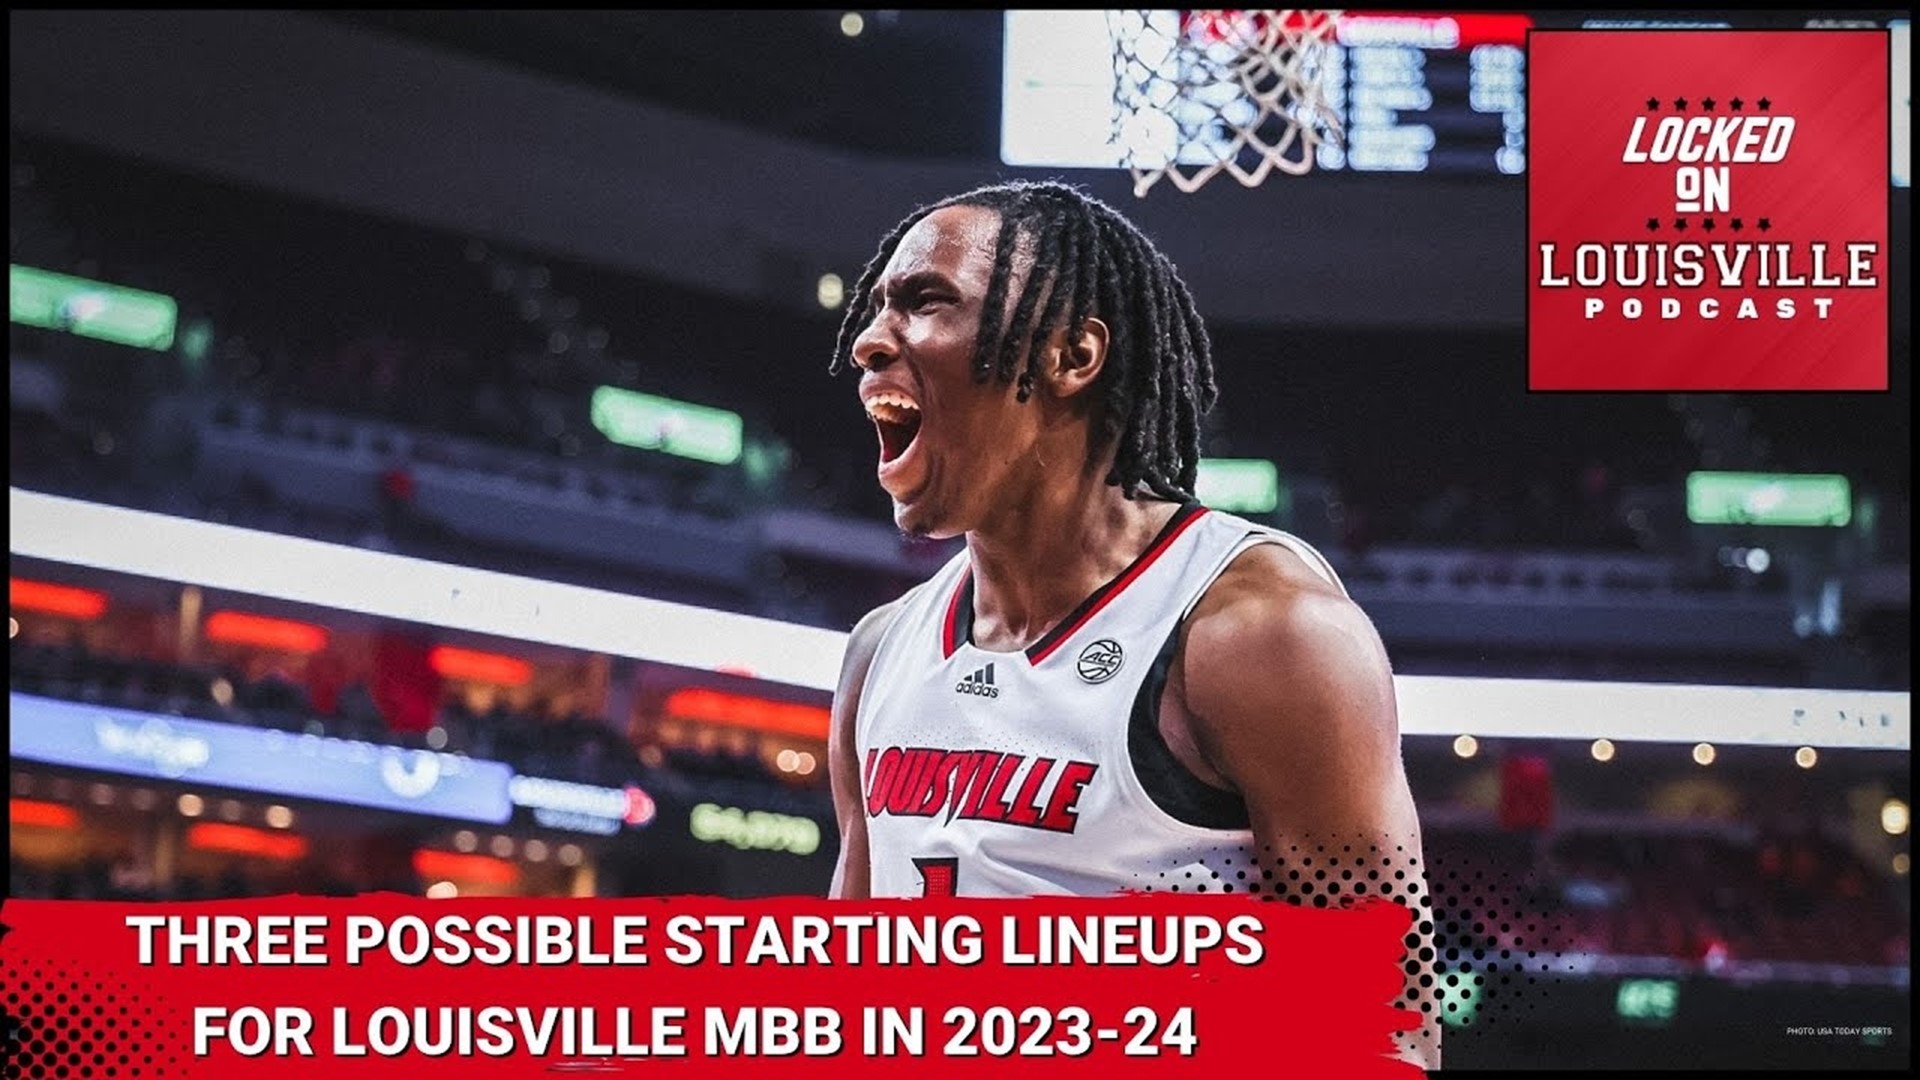 Breaking down three possible starting lineups for the Louisville men's basketball team next season